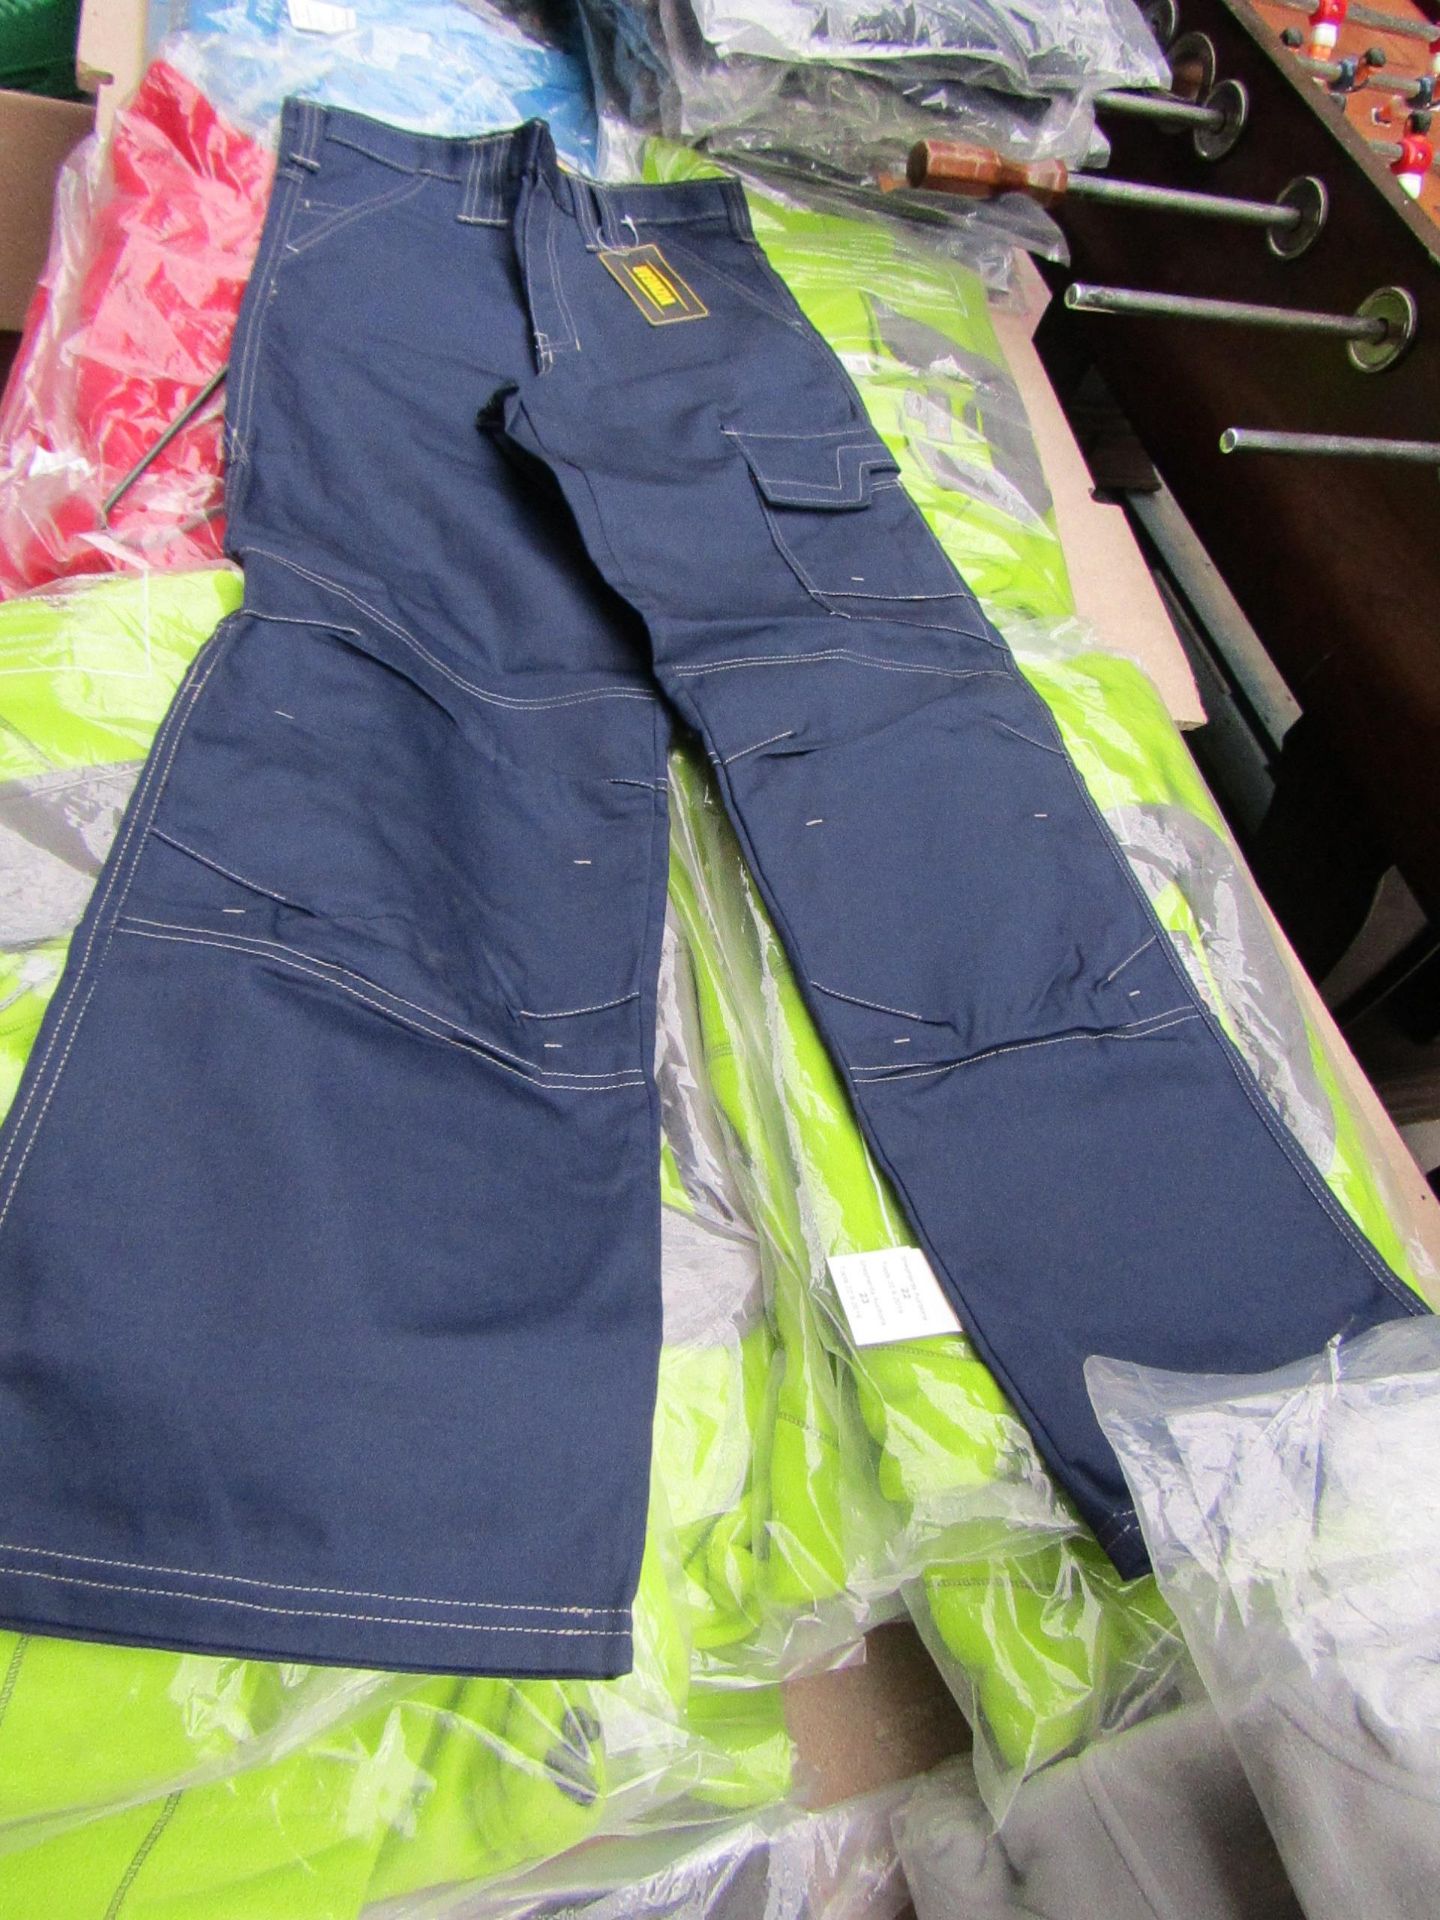 Vizwear action line trousers, size 32R, new and packaged.